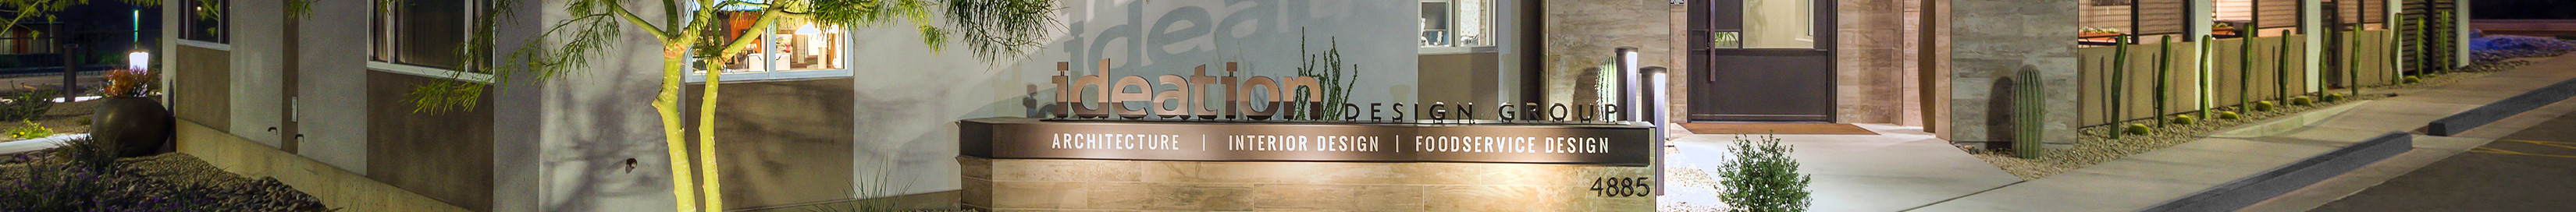 Ideation Design Group's profile banner